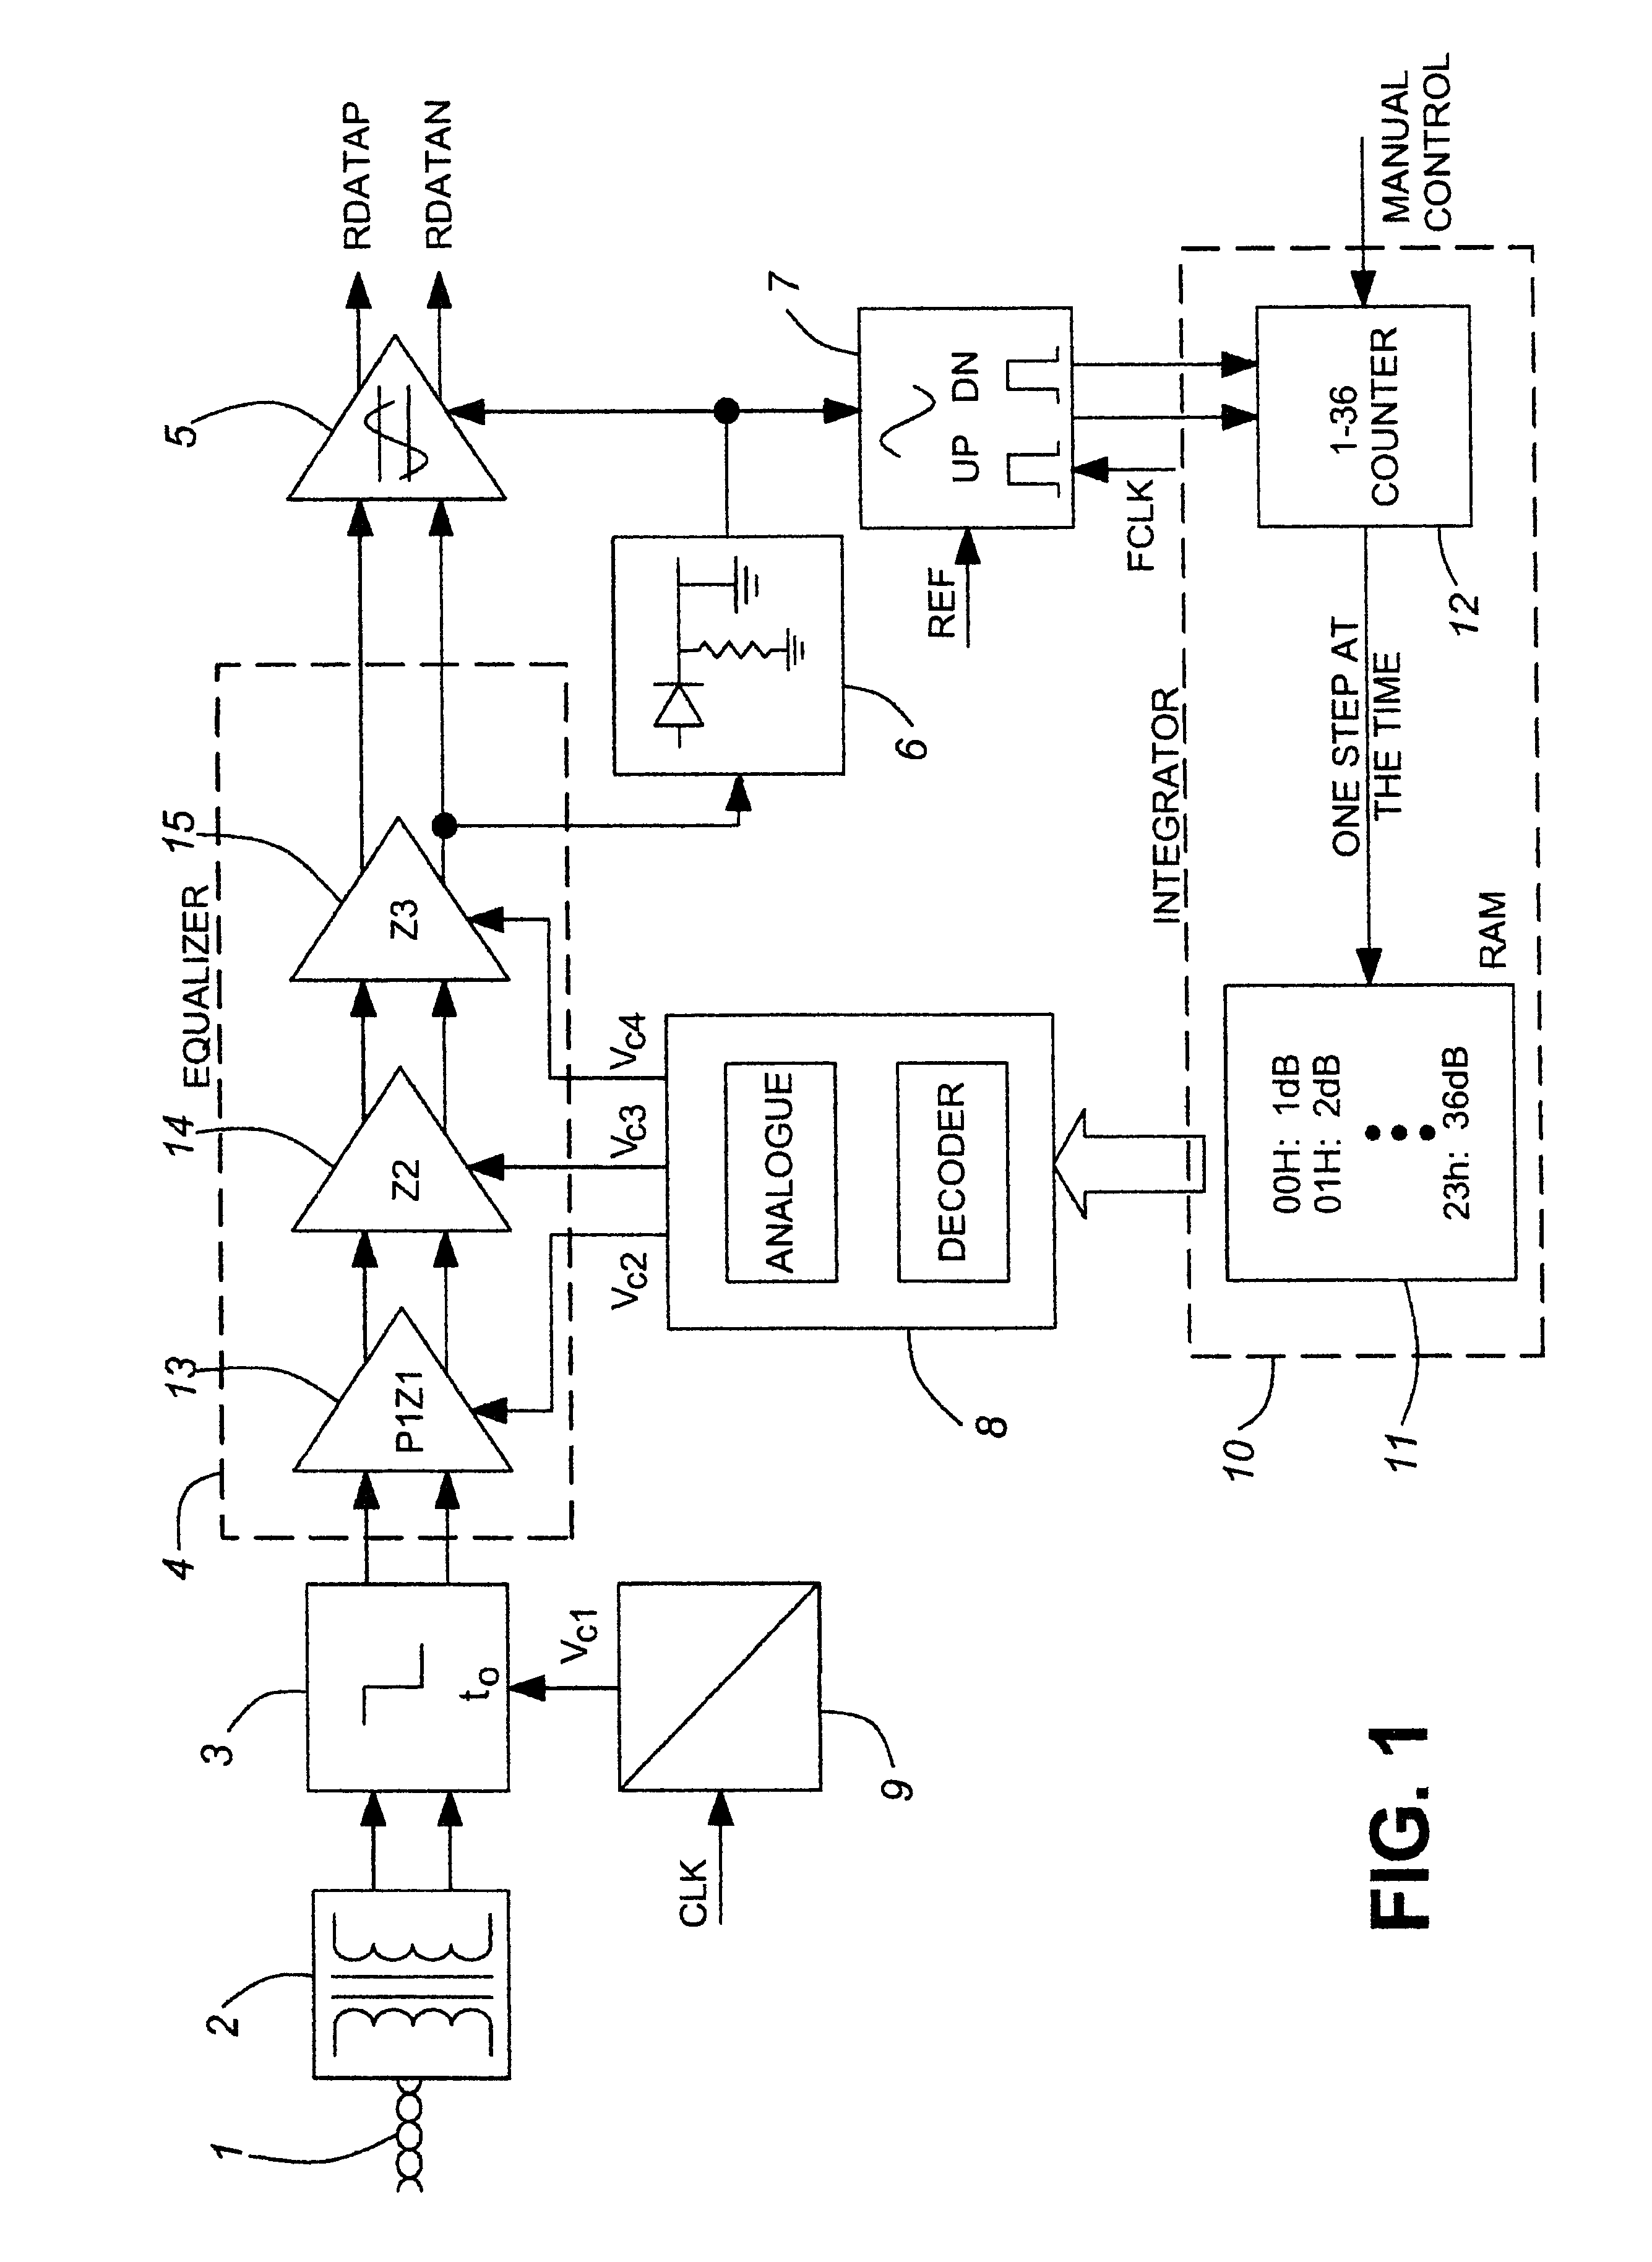 Implementation method for adaptive equalizer in CMOS